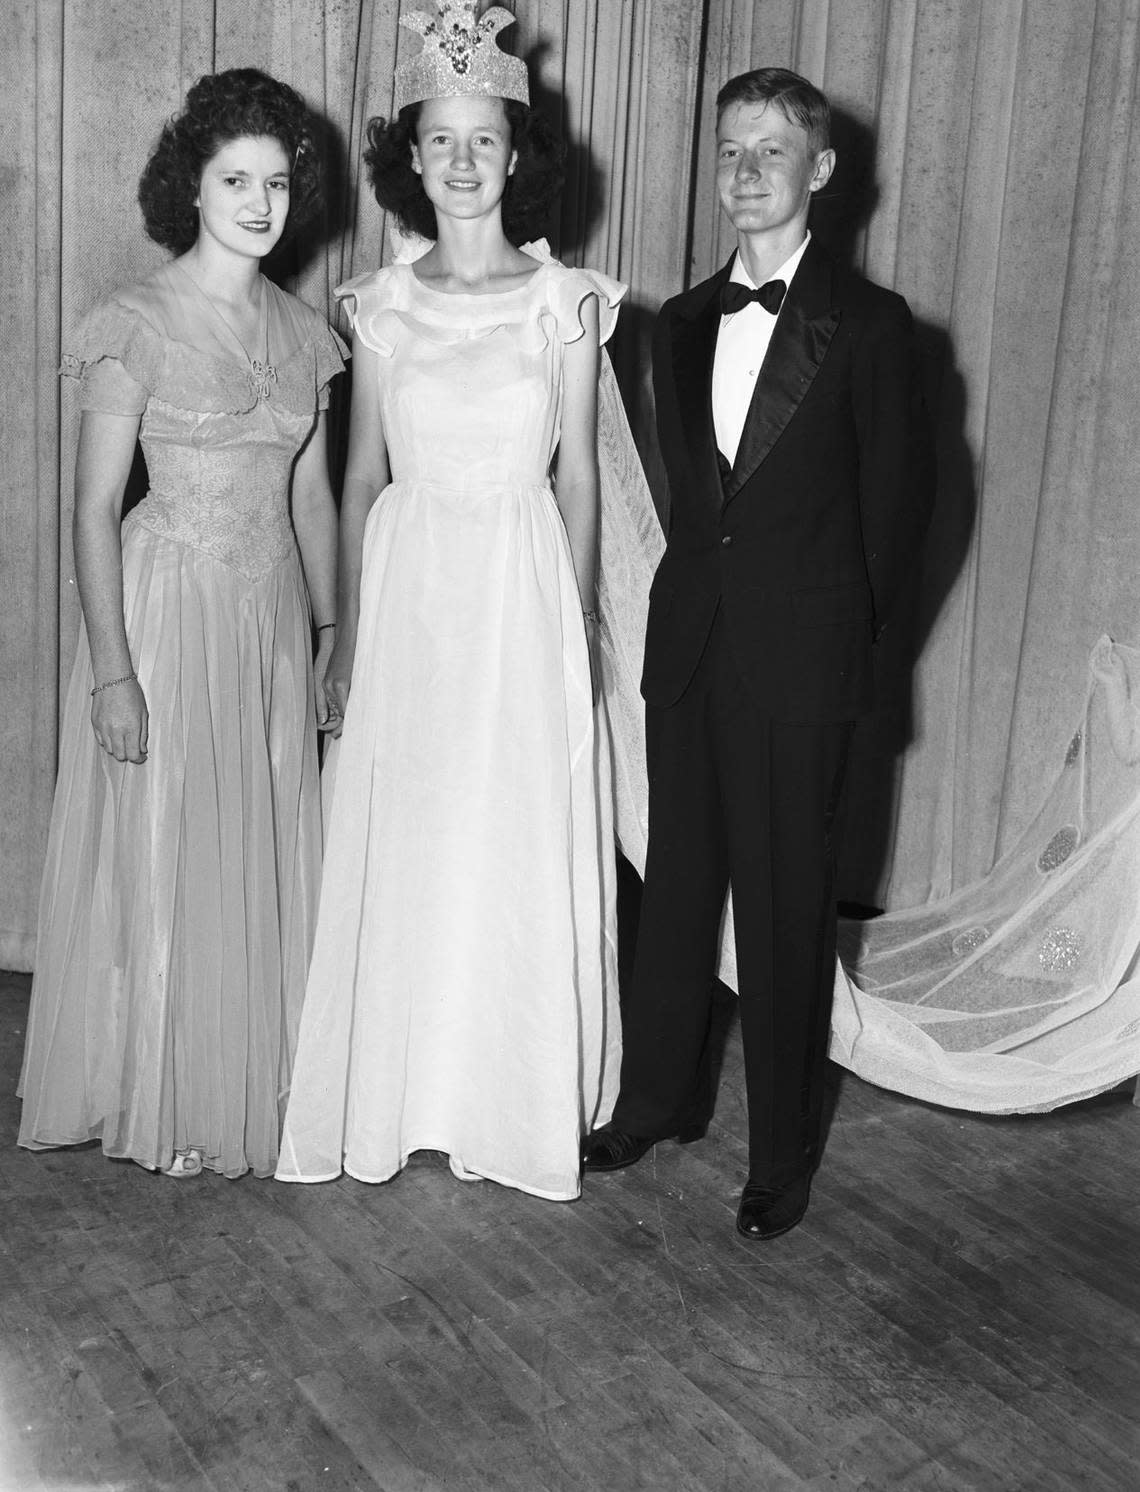 May 3, 1946: Evelyn Owens was crowned queen at the May Fete at Keller School. Her lady-in-waiting was Mary Sheehey, left, and the prime minister was Don L. Biles Jr. Fort Worth Star-Telegram archive/UT Arlington Special Collections